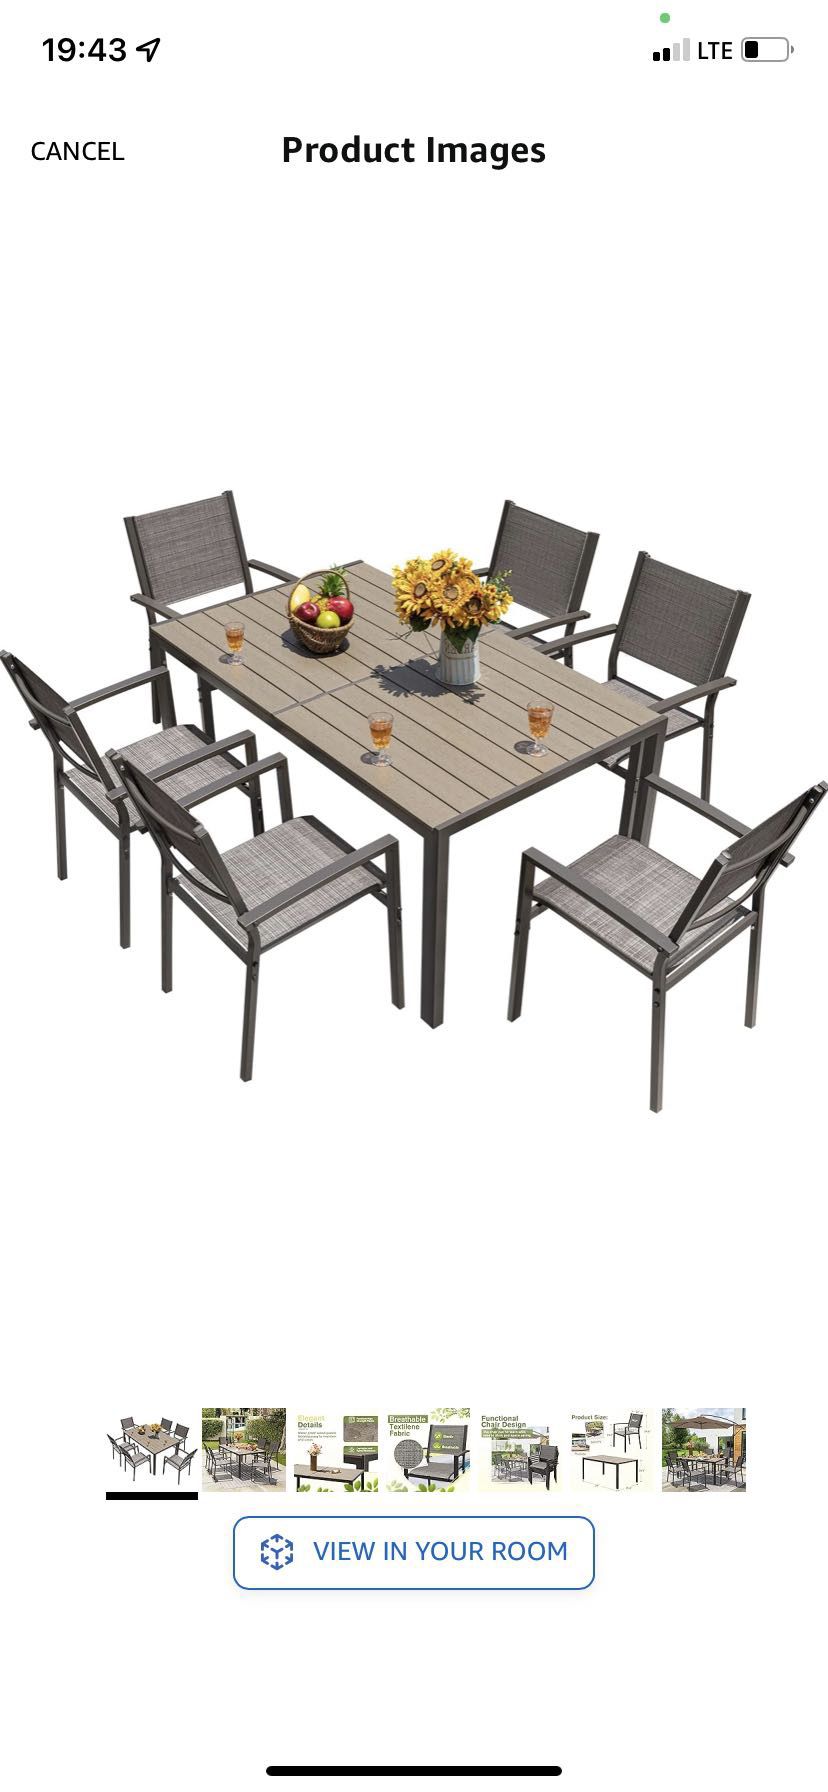 7 Pieces Patio Dining Set Outdoor Furniture with 6 Stackable Textilene Chairs and Large Table for Yard, Garden, Porch and Poolside, Grey